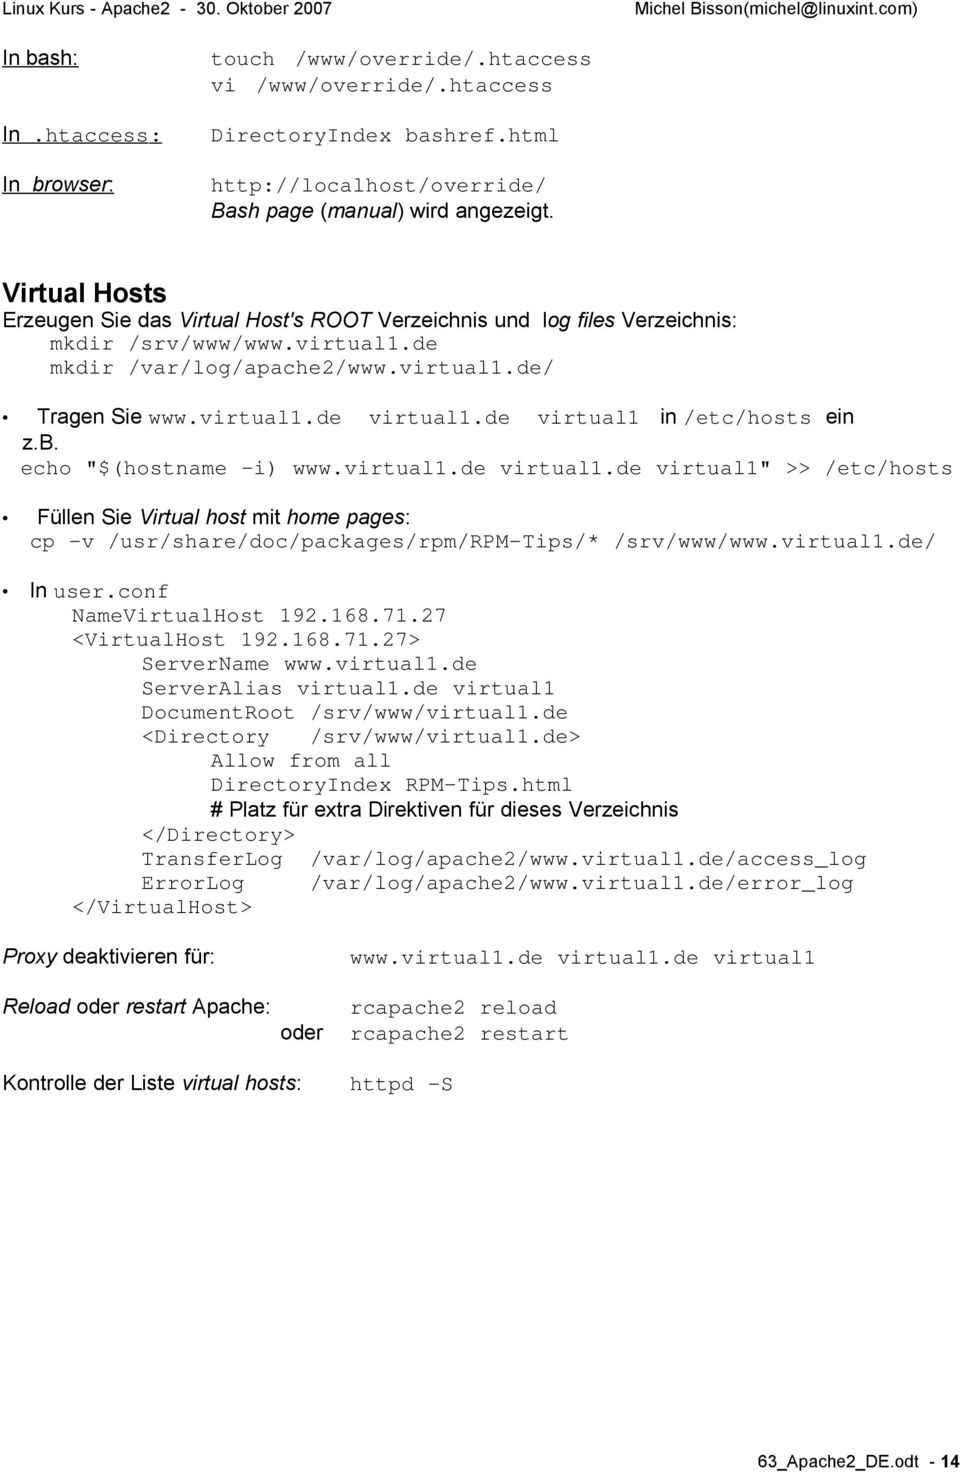 de virtual1 in /etc/hosts ein z.b. echo "$(hostname -i) www.virtual1.de virtual1.de virtual1" >> /etc/hosts Füllen Sie Virtual host mit home pages: cp -v /usr/share/doc/packages/rpm/rpm-tips/* /srv/www/www.